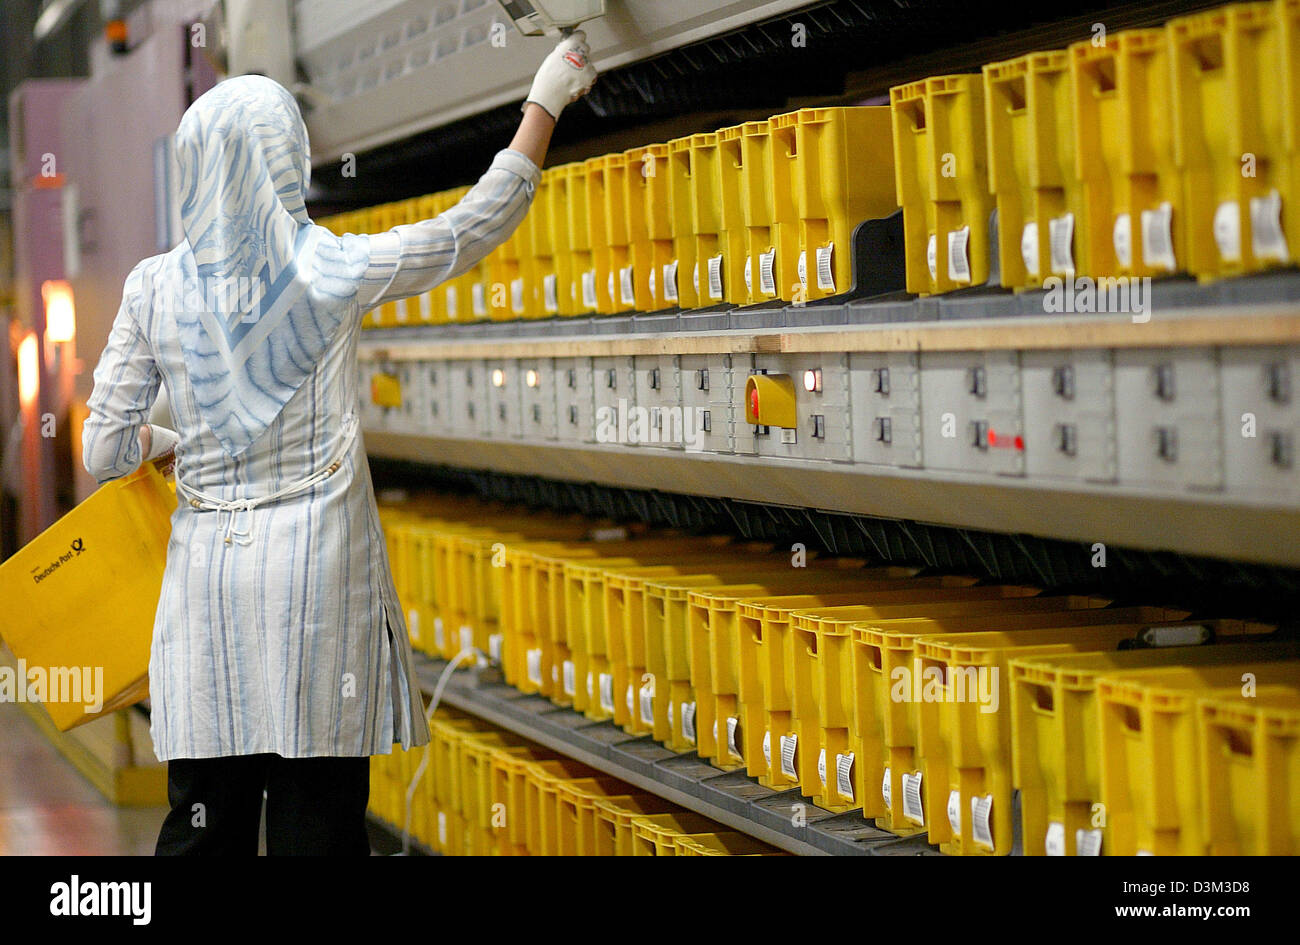 (dpa) - An employee of the Deutsche Post World Net operates an oversized letters sorting machine in the Mail Logistic Centre in Spich near Bonn, Germany, 21 July 2005. The Deutsche Post World Net employs circa 127,000 employees in the branch 'Letter National' handling and delivering an average of 70 million sendings per day. Photo: Felix Heyder Stock Photo